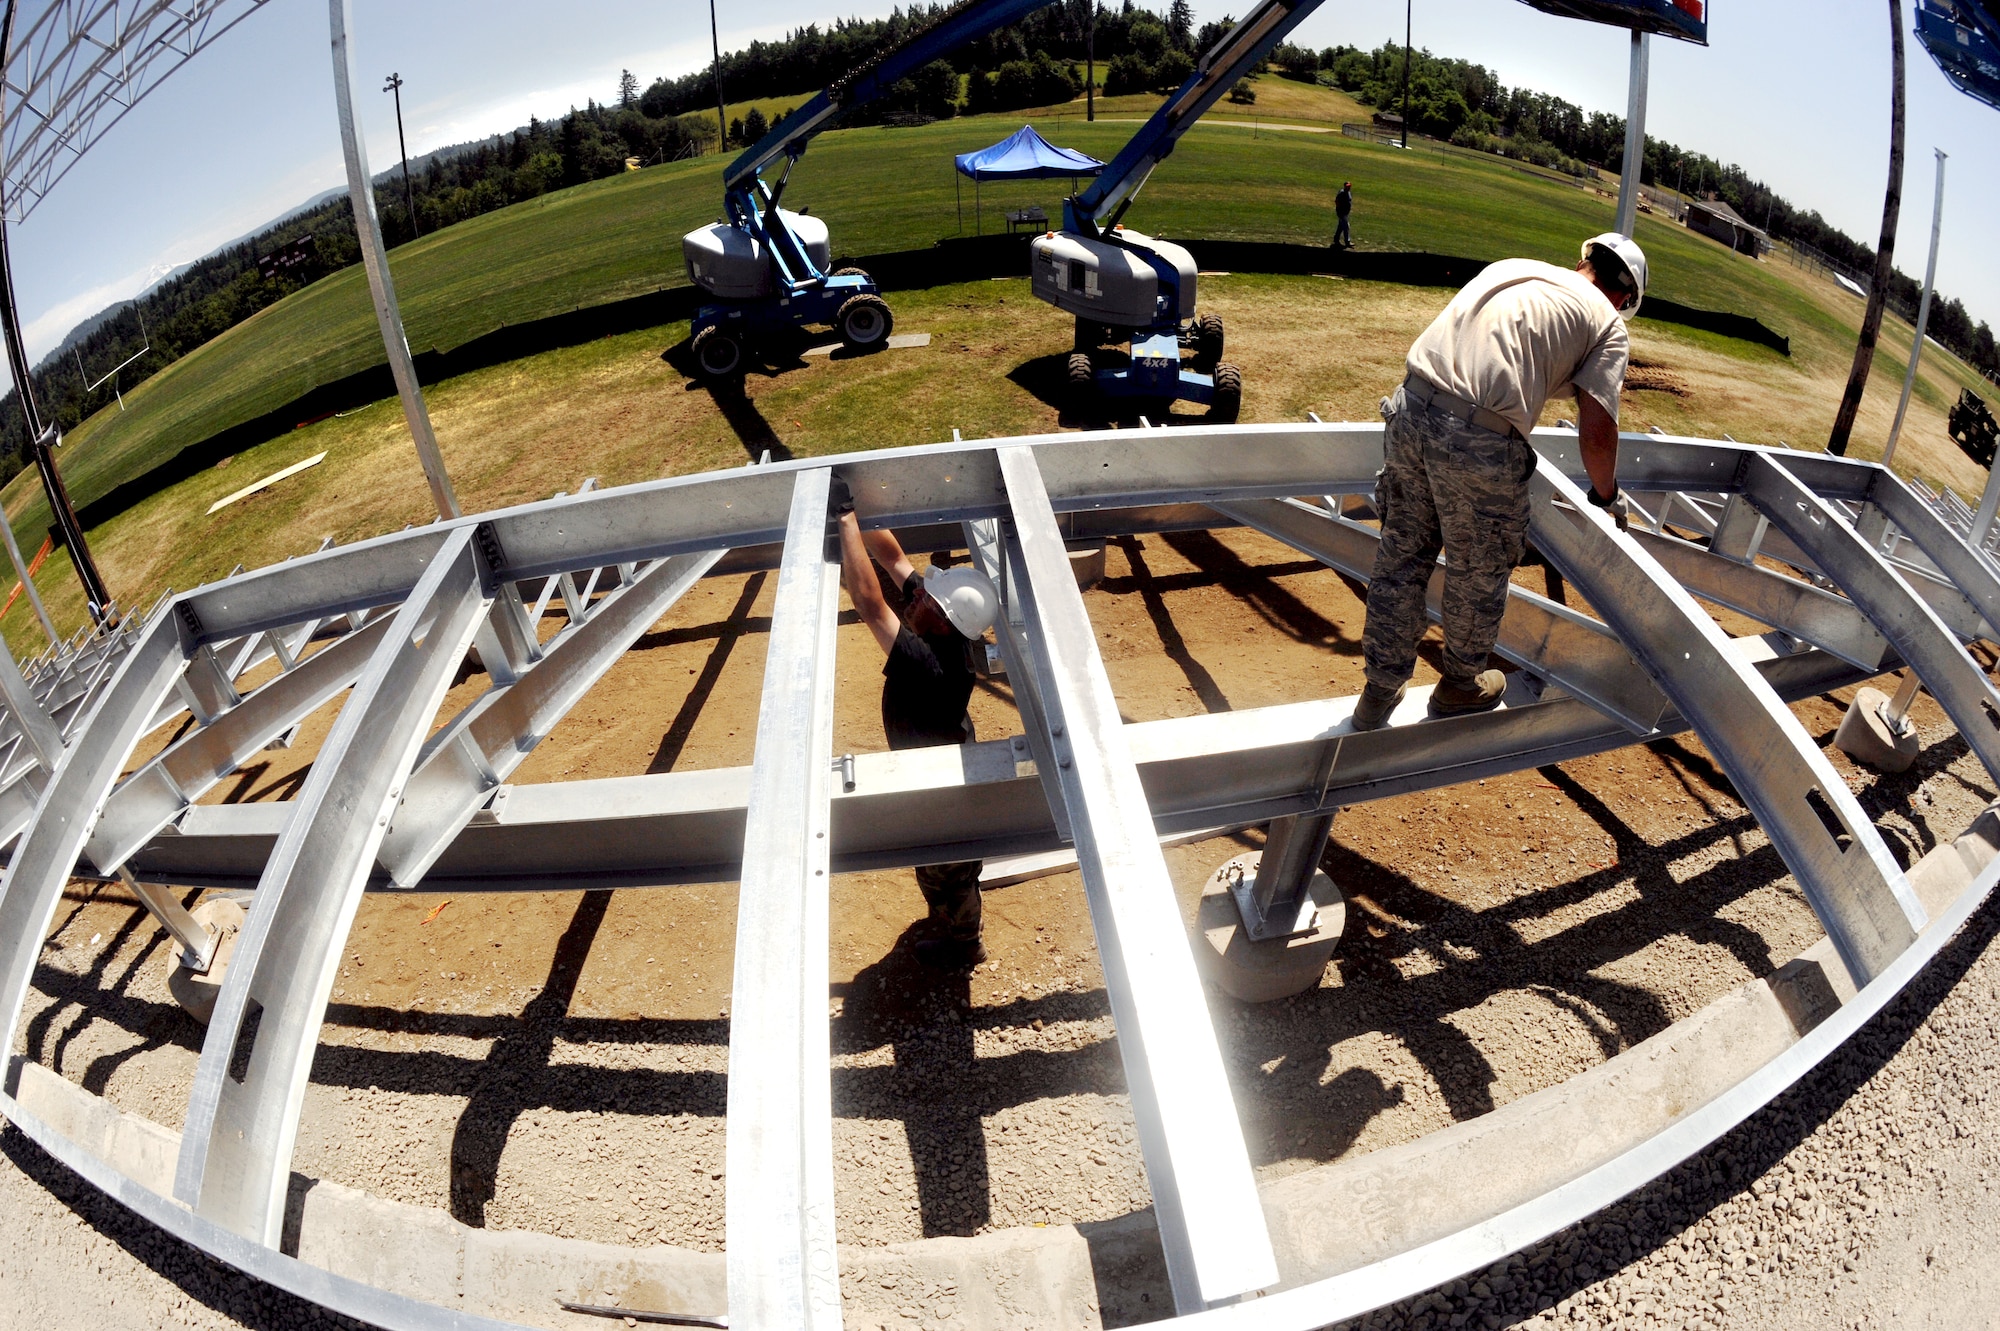 Oregon Air National Guard Airmen from the 142nd Civil Engineers Squadron work on the Jeff Lucas Veterans Memorial Stadium at Corbett High School, Corbett, Ore. The new stadium and sports complex, brought together members of the local community and the Airmen of the 142nd CES, who committed over 500 hours of construction time to the finished project. (U.S. Air Force photograph by Tech. Sgt. John Hughel, 142nd Fighter Wing Public Affairs)